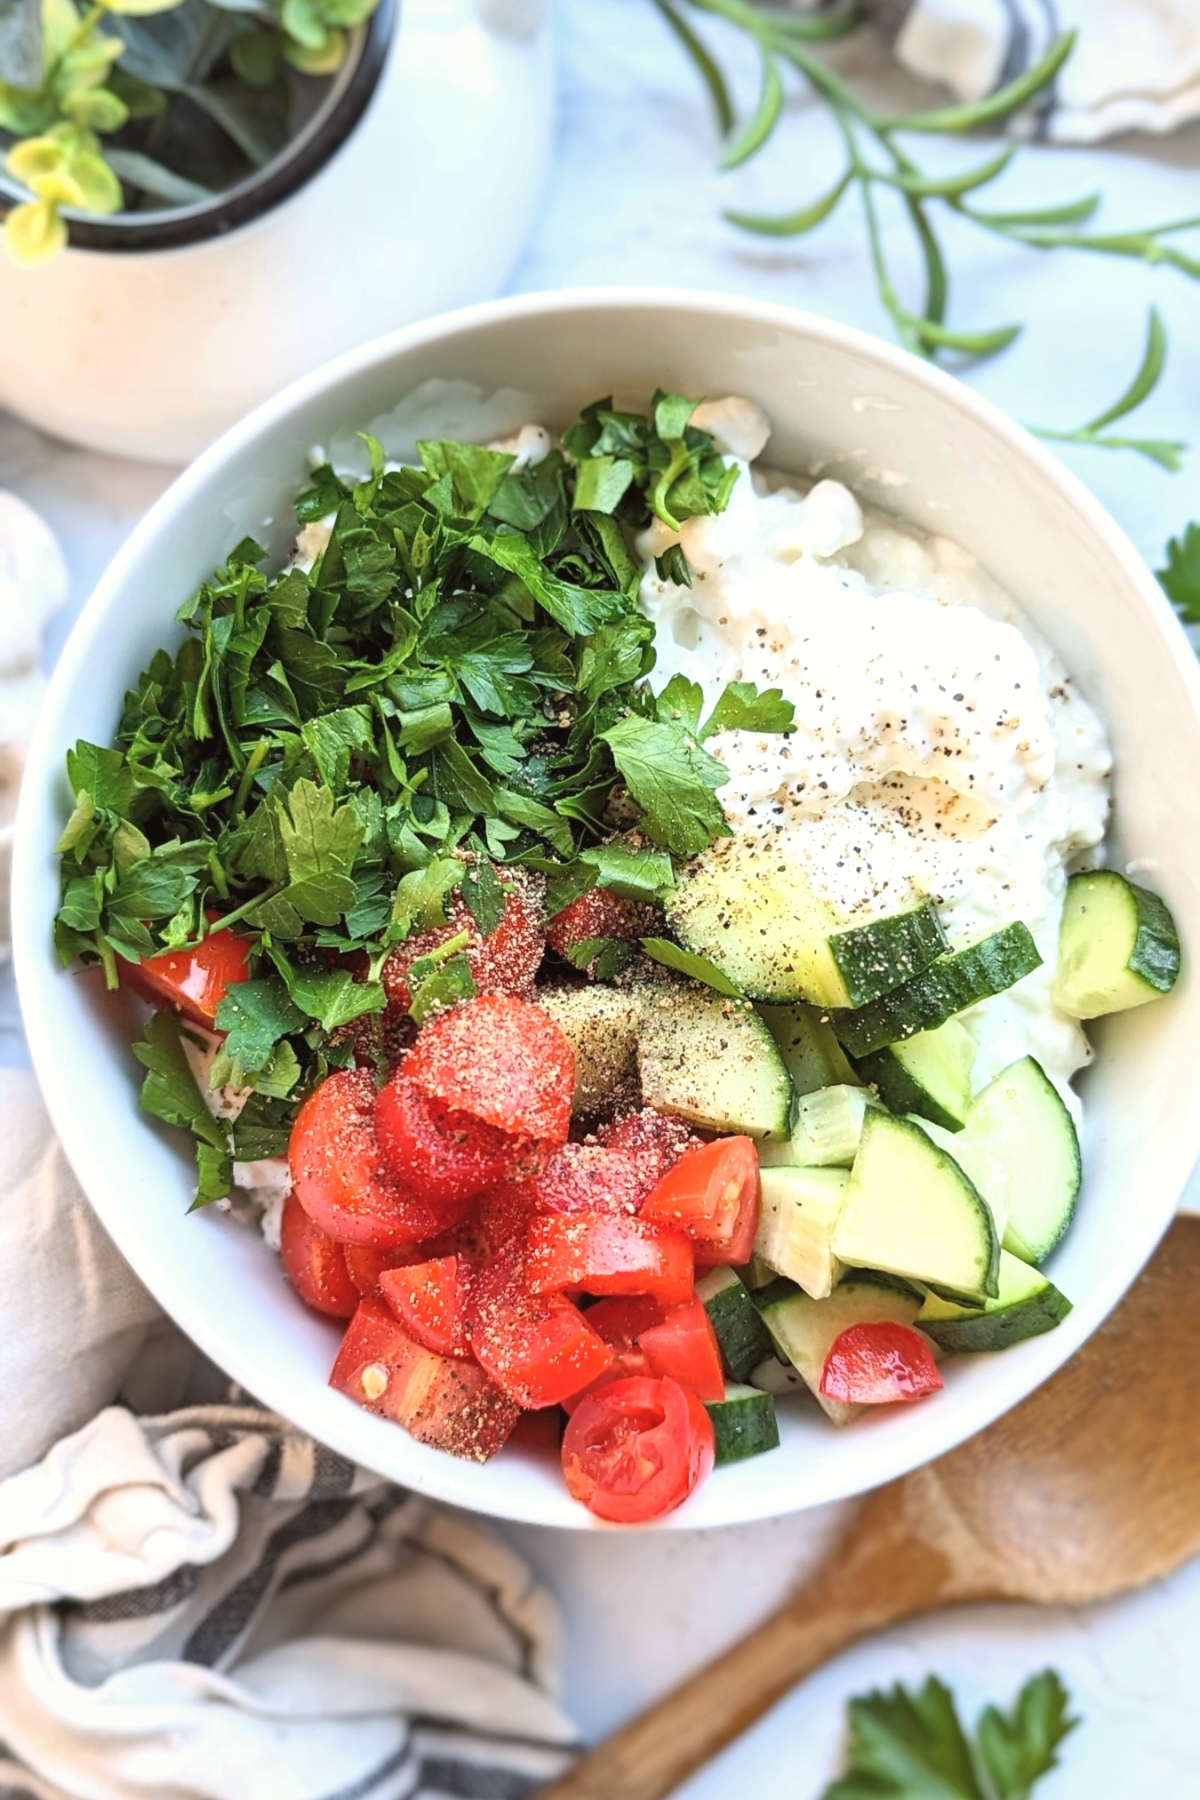 savory cottage cheese bowl recipe with tomato cucumber parsley or spinach and high protein cottage cheese recipes vegetarian and gluten free